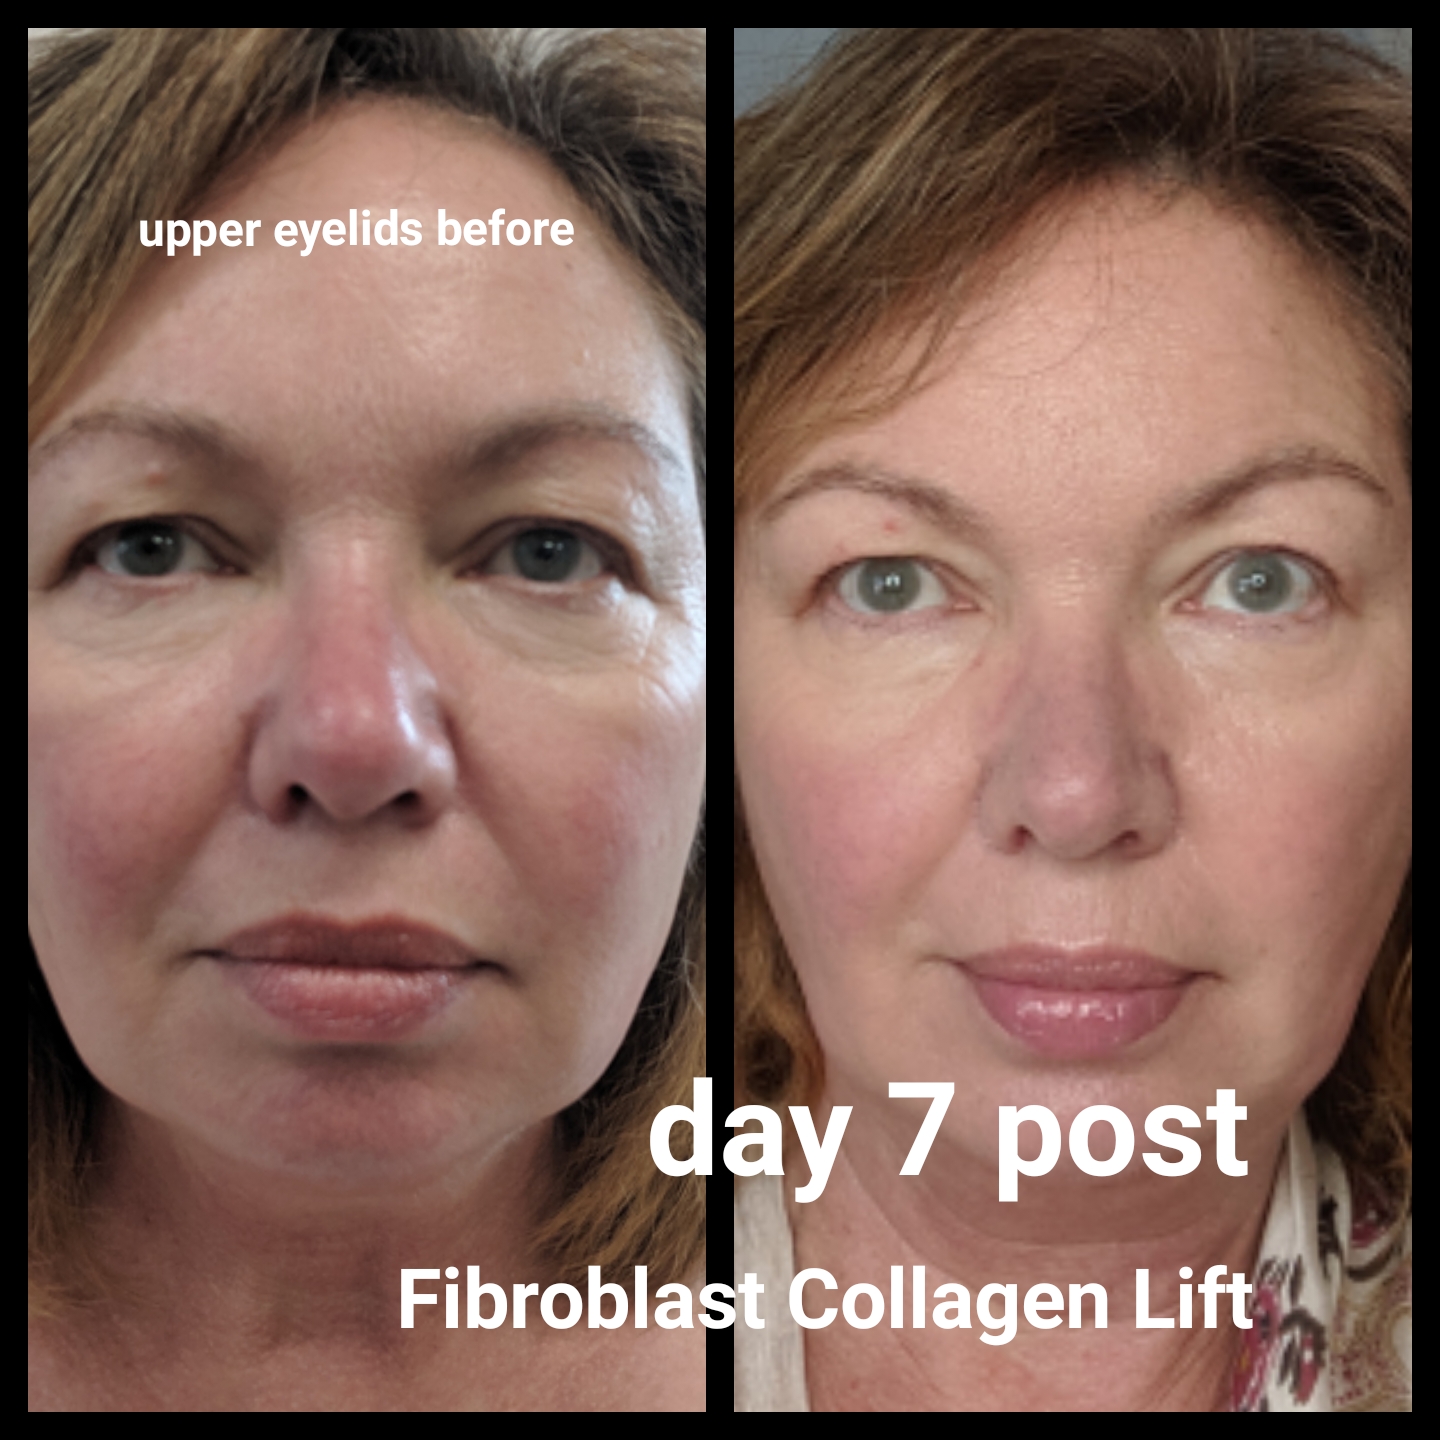 We do Fibroblast. Book your appointment today at 442-899-8819